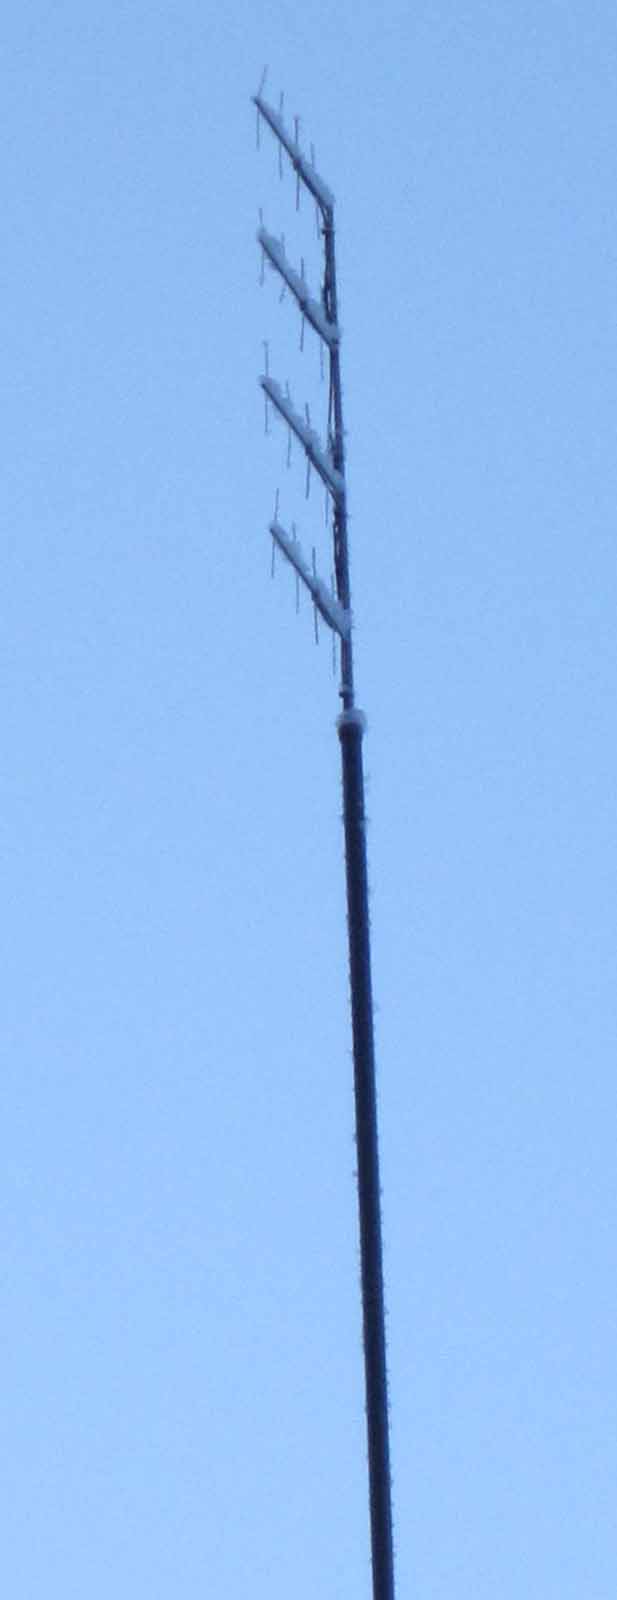 IMG_7764 Wintertime view of 4x4-el stacked vertical yagi array for 1090 MHz (c) OH7HJ.JPG